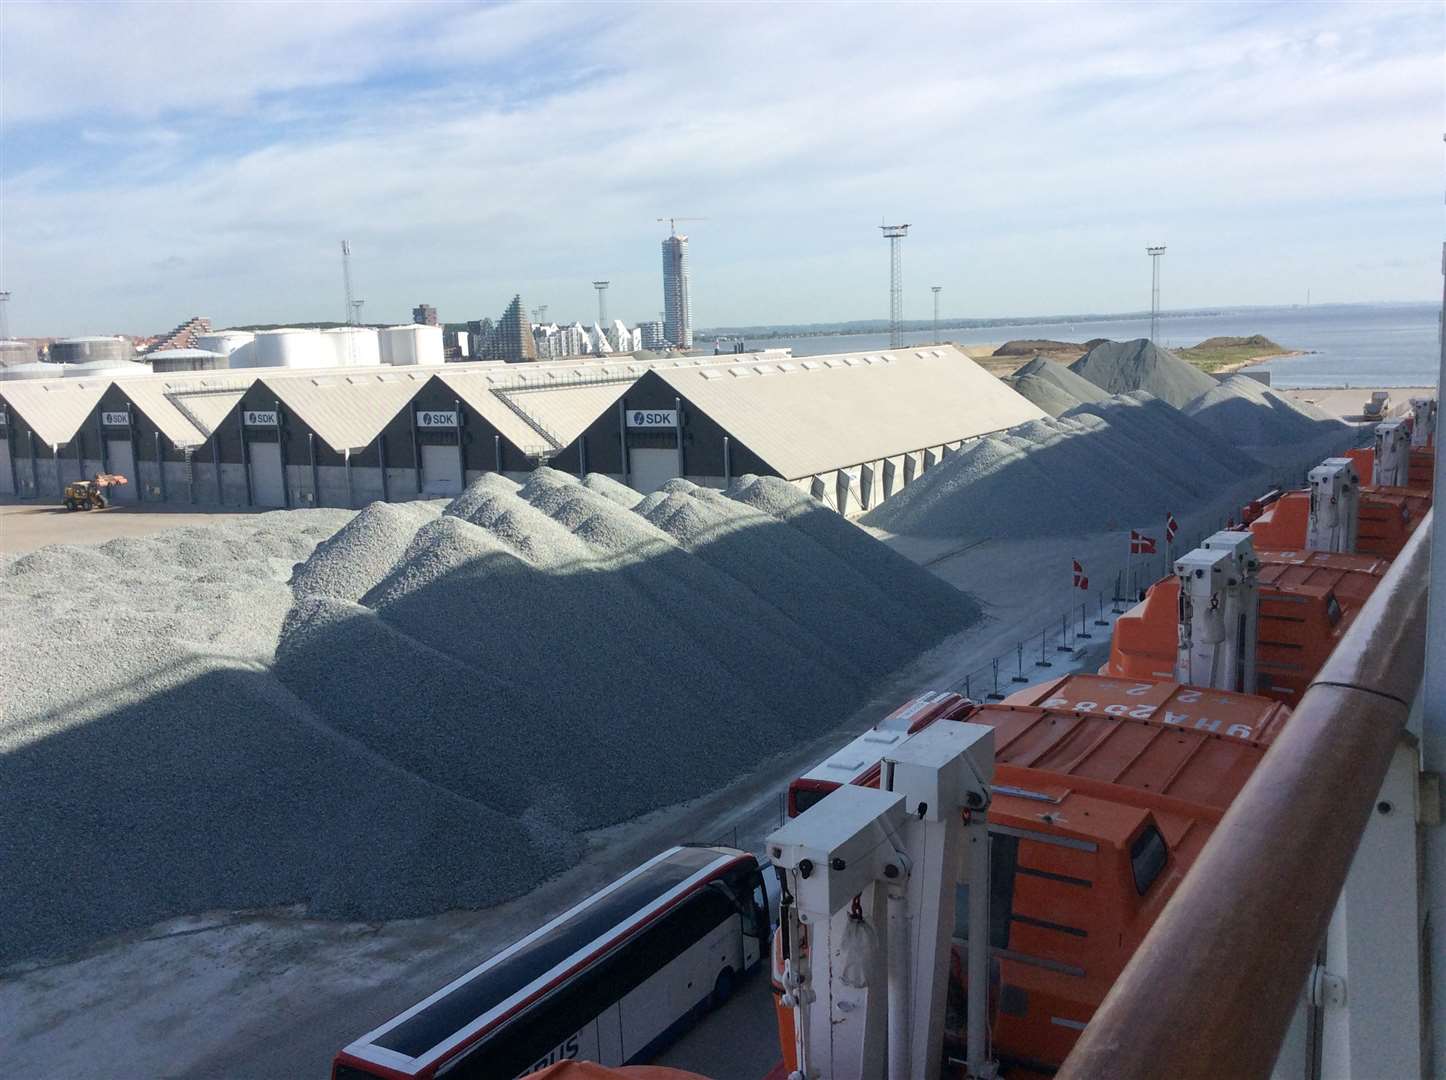 Cement works in the port of Aathus, Denmark. Brian Spoor, who took the photo, says white dust covers the roofs of the factory